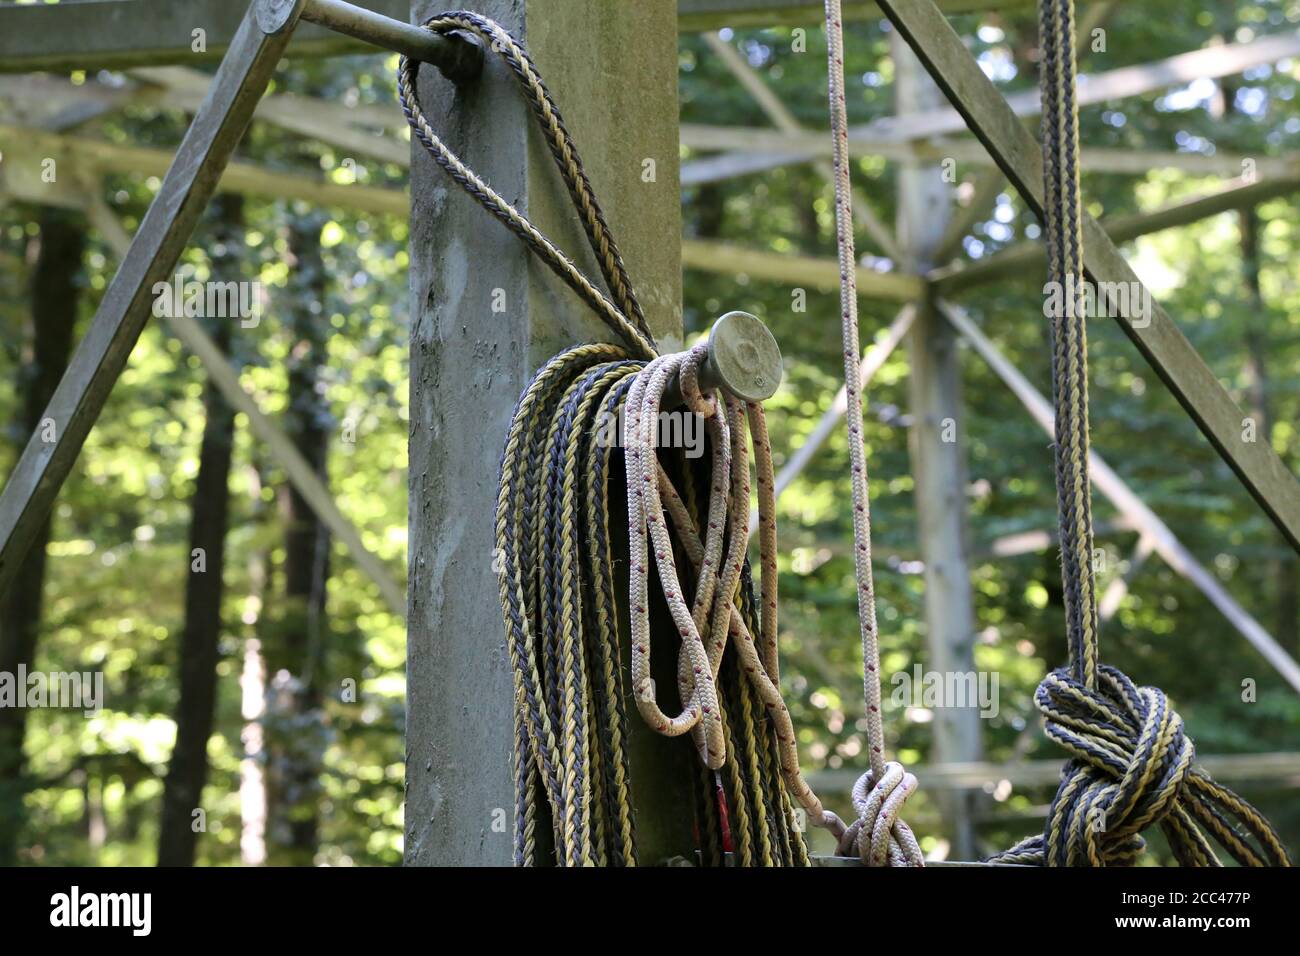 A long rope coil hangs on a metal structure Stock Photo - Alamy